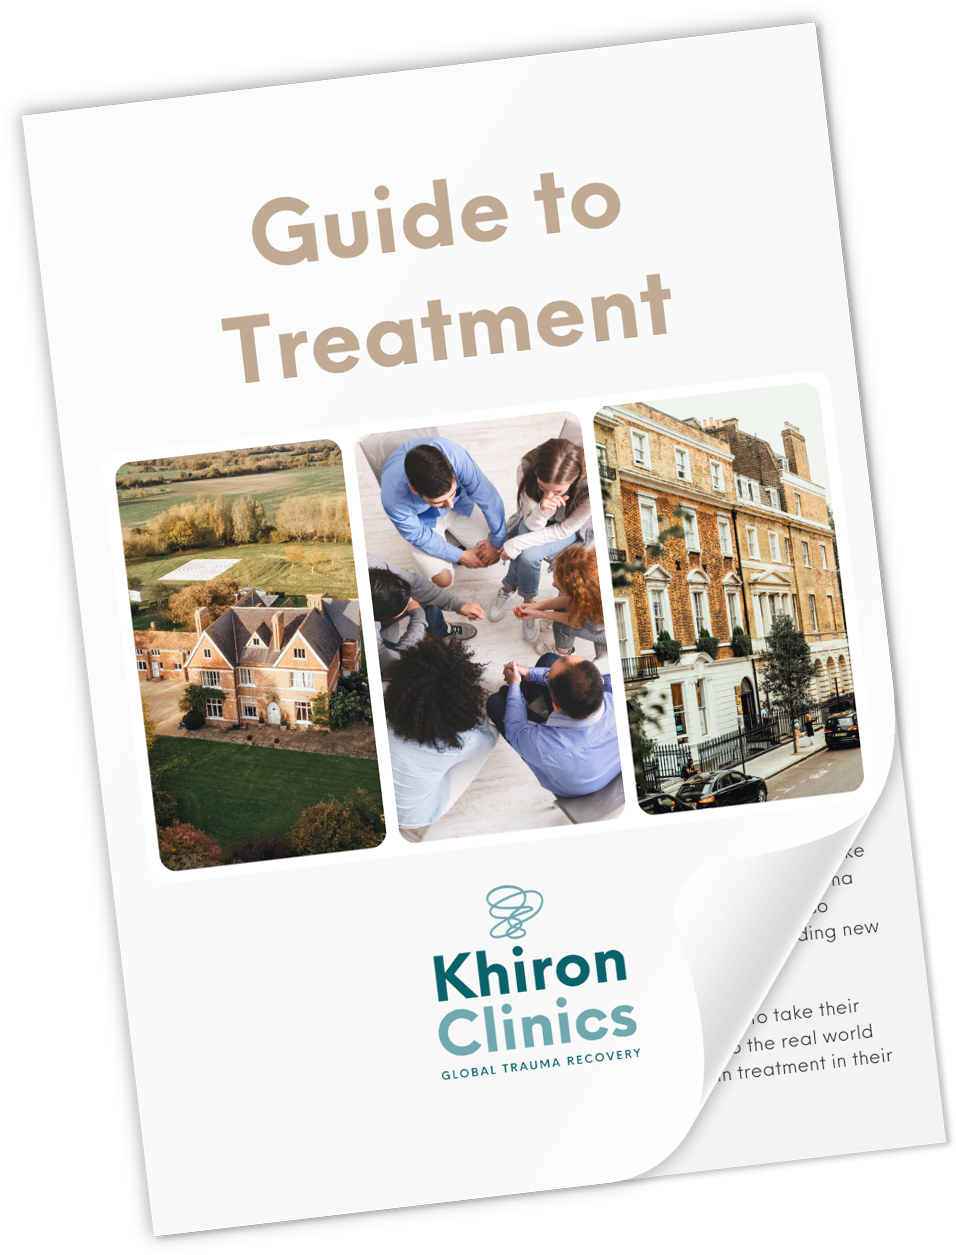 A brochure cover titled "Guide to Treatment" features three photos: a large countryside house, a group of people in discussion, and a row of townhouses. The Khiron Clinics logo and the tagline "Global Trauma Recovery" are displayed at the bottom, highlighting their commitment to trauma treatment.